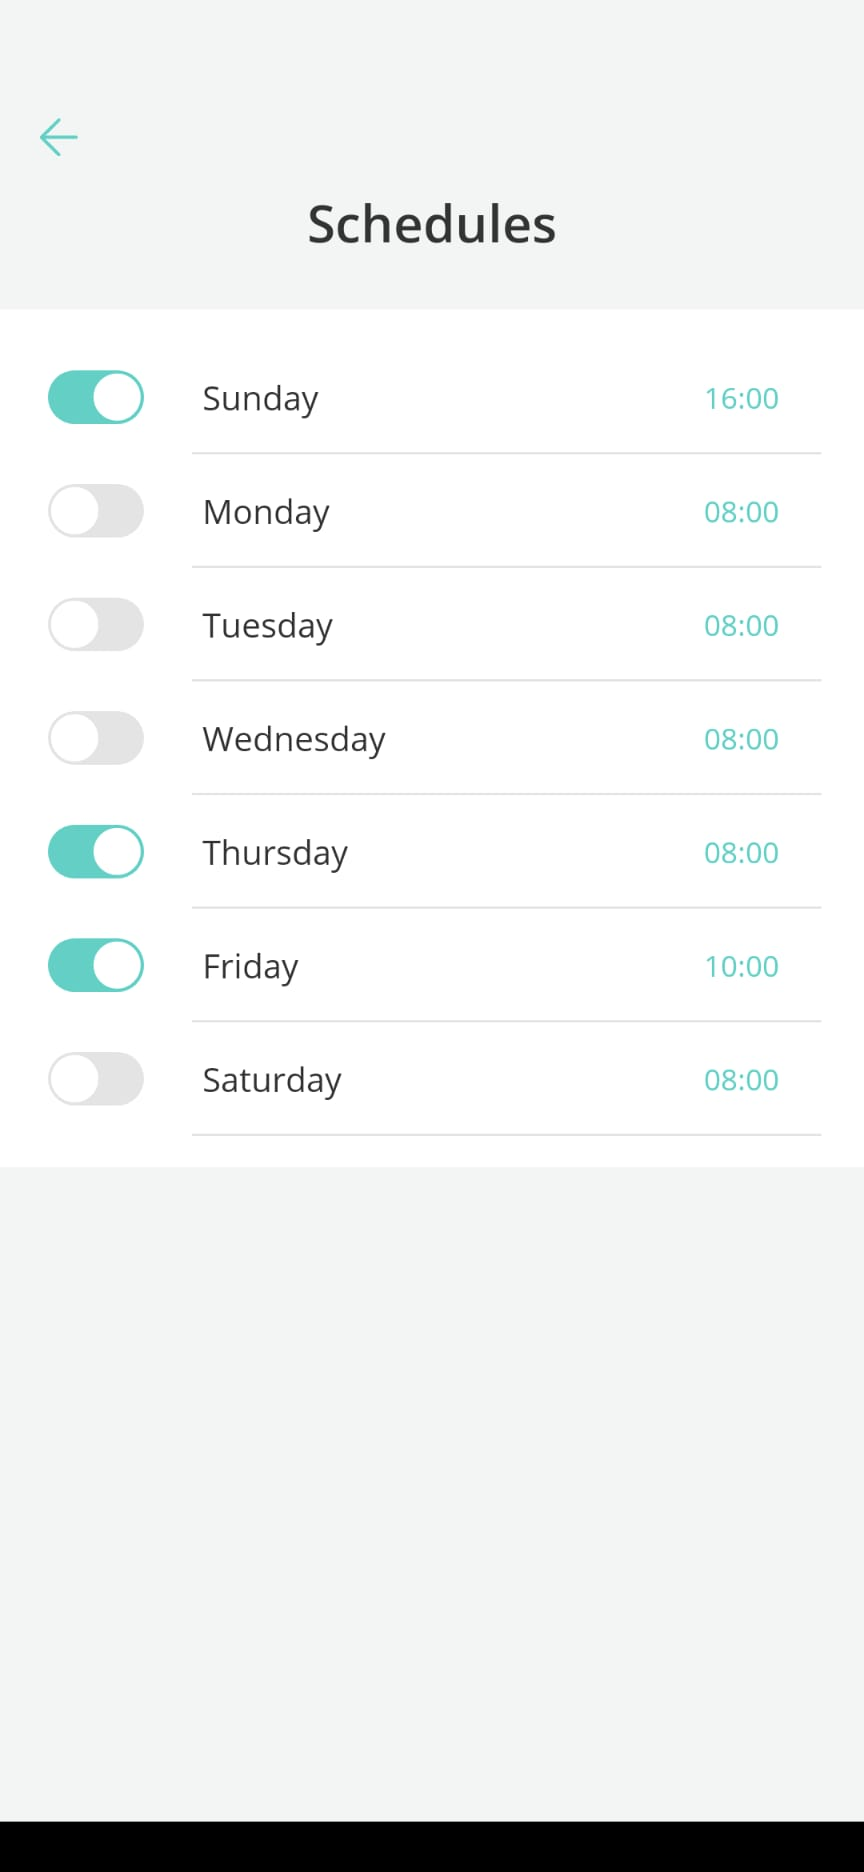 You can schedule cleans to start at certain times